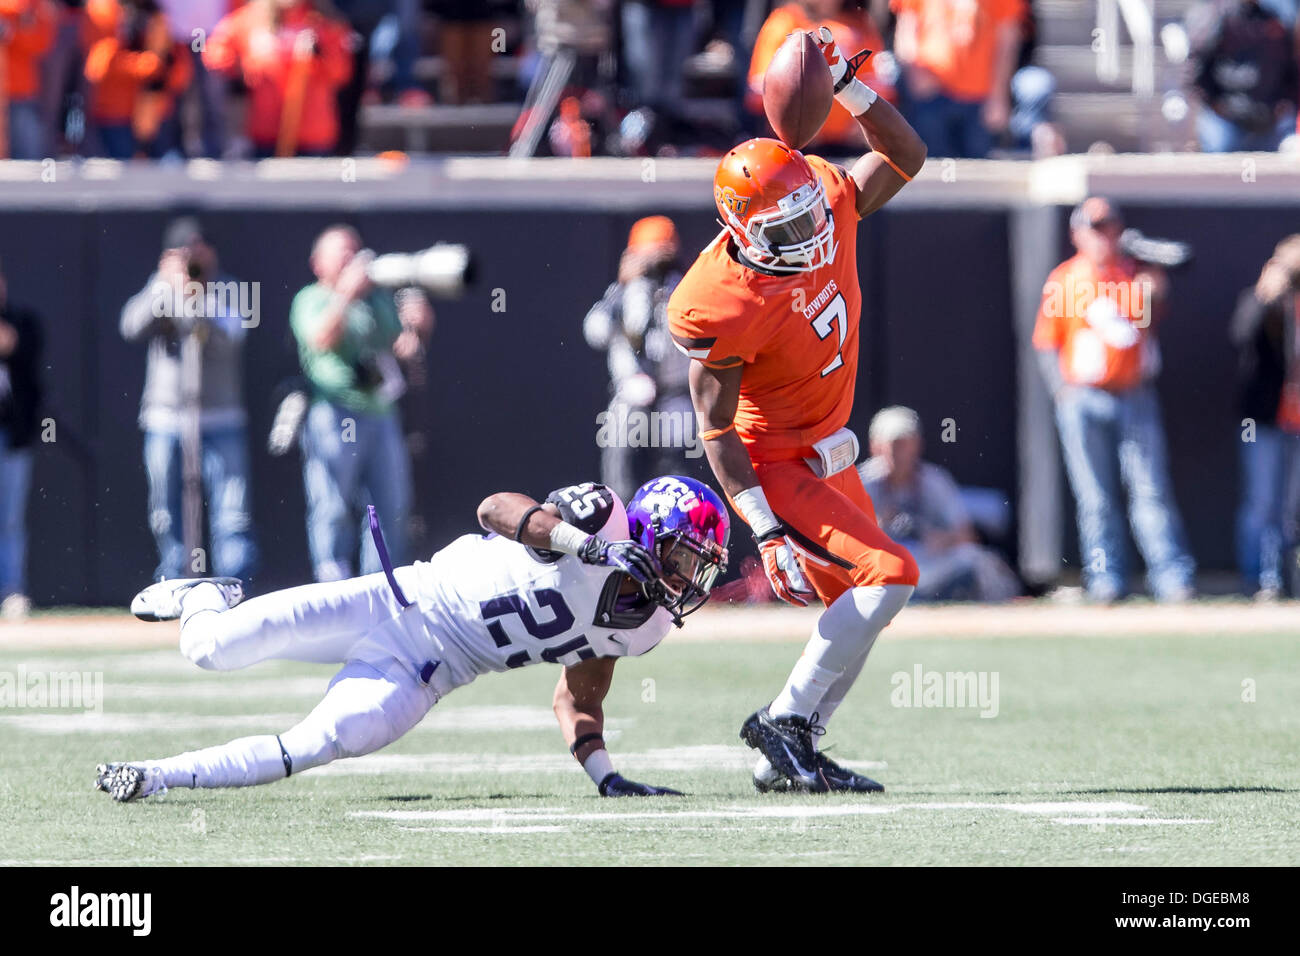 Stillwater, Oklahoma, USA. 19th Oct, 2013. October 19, 2103: Oklahoma State Cowboys wide receiver Brandon Sheperd (7) cannot hold on to a pass defended by TCU Horned Frogs cornerback Kevin White (25) during the NCAA football game between the TCU Horned Frogs and the Oklahoma State Cowboys at Boone Pickens Stadium in Stillwater, OK. The Cowboys defeated the Horned Frogs 24-10. © csm/Alamy Live News Stock Photo